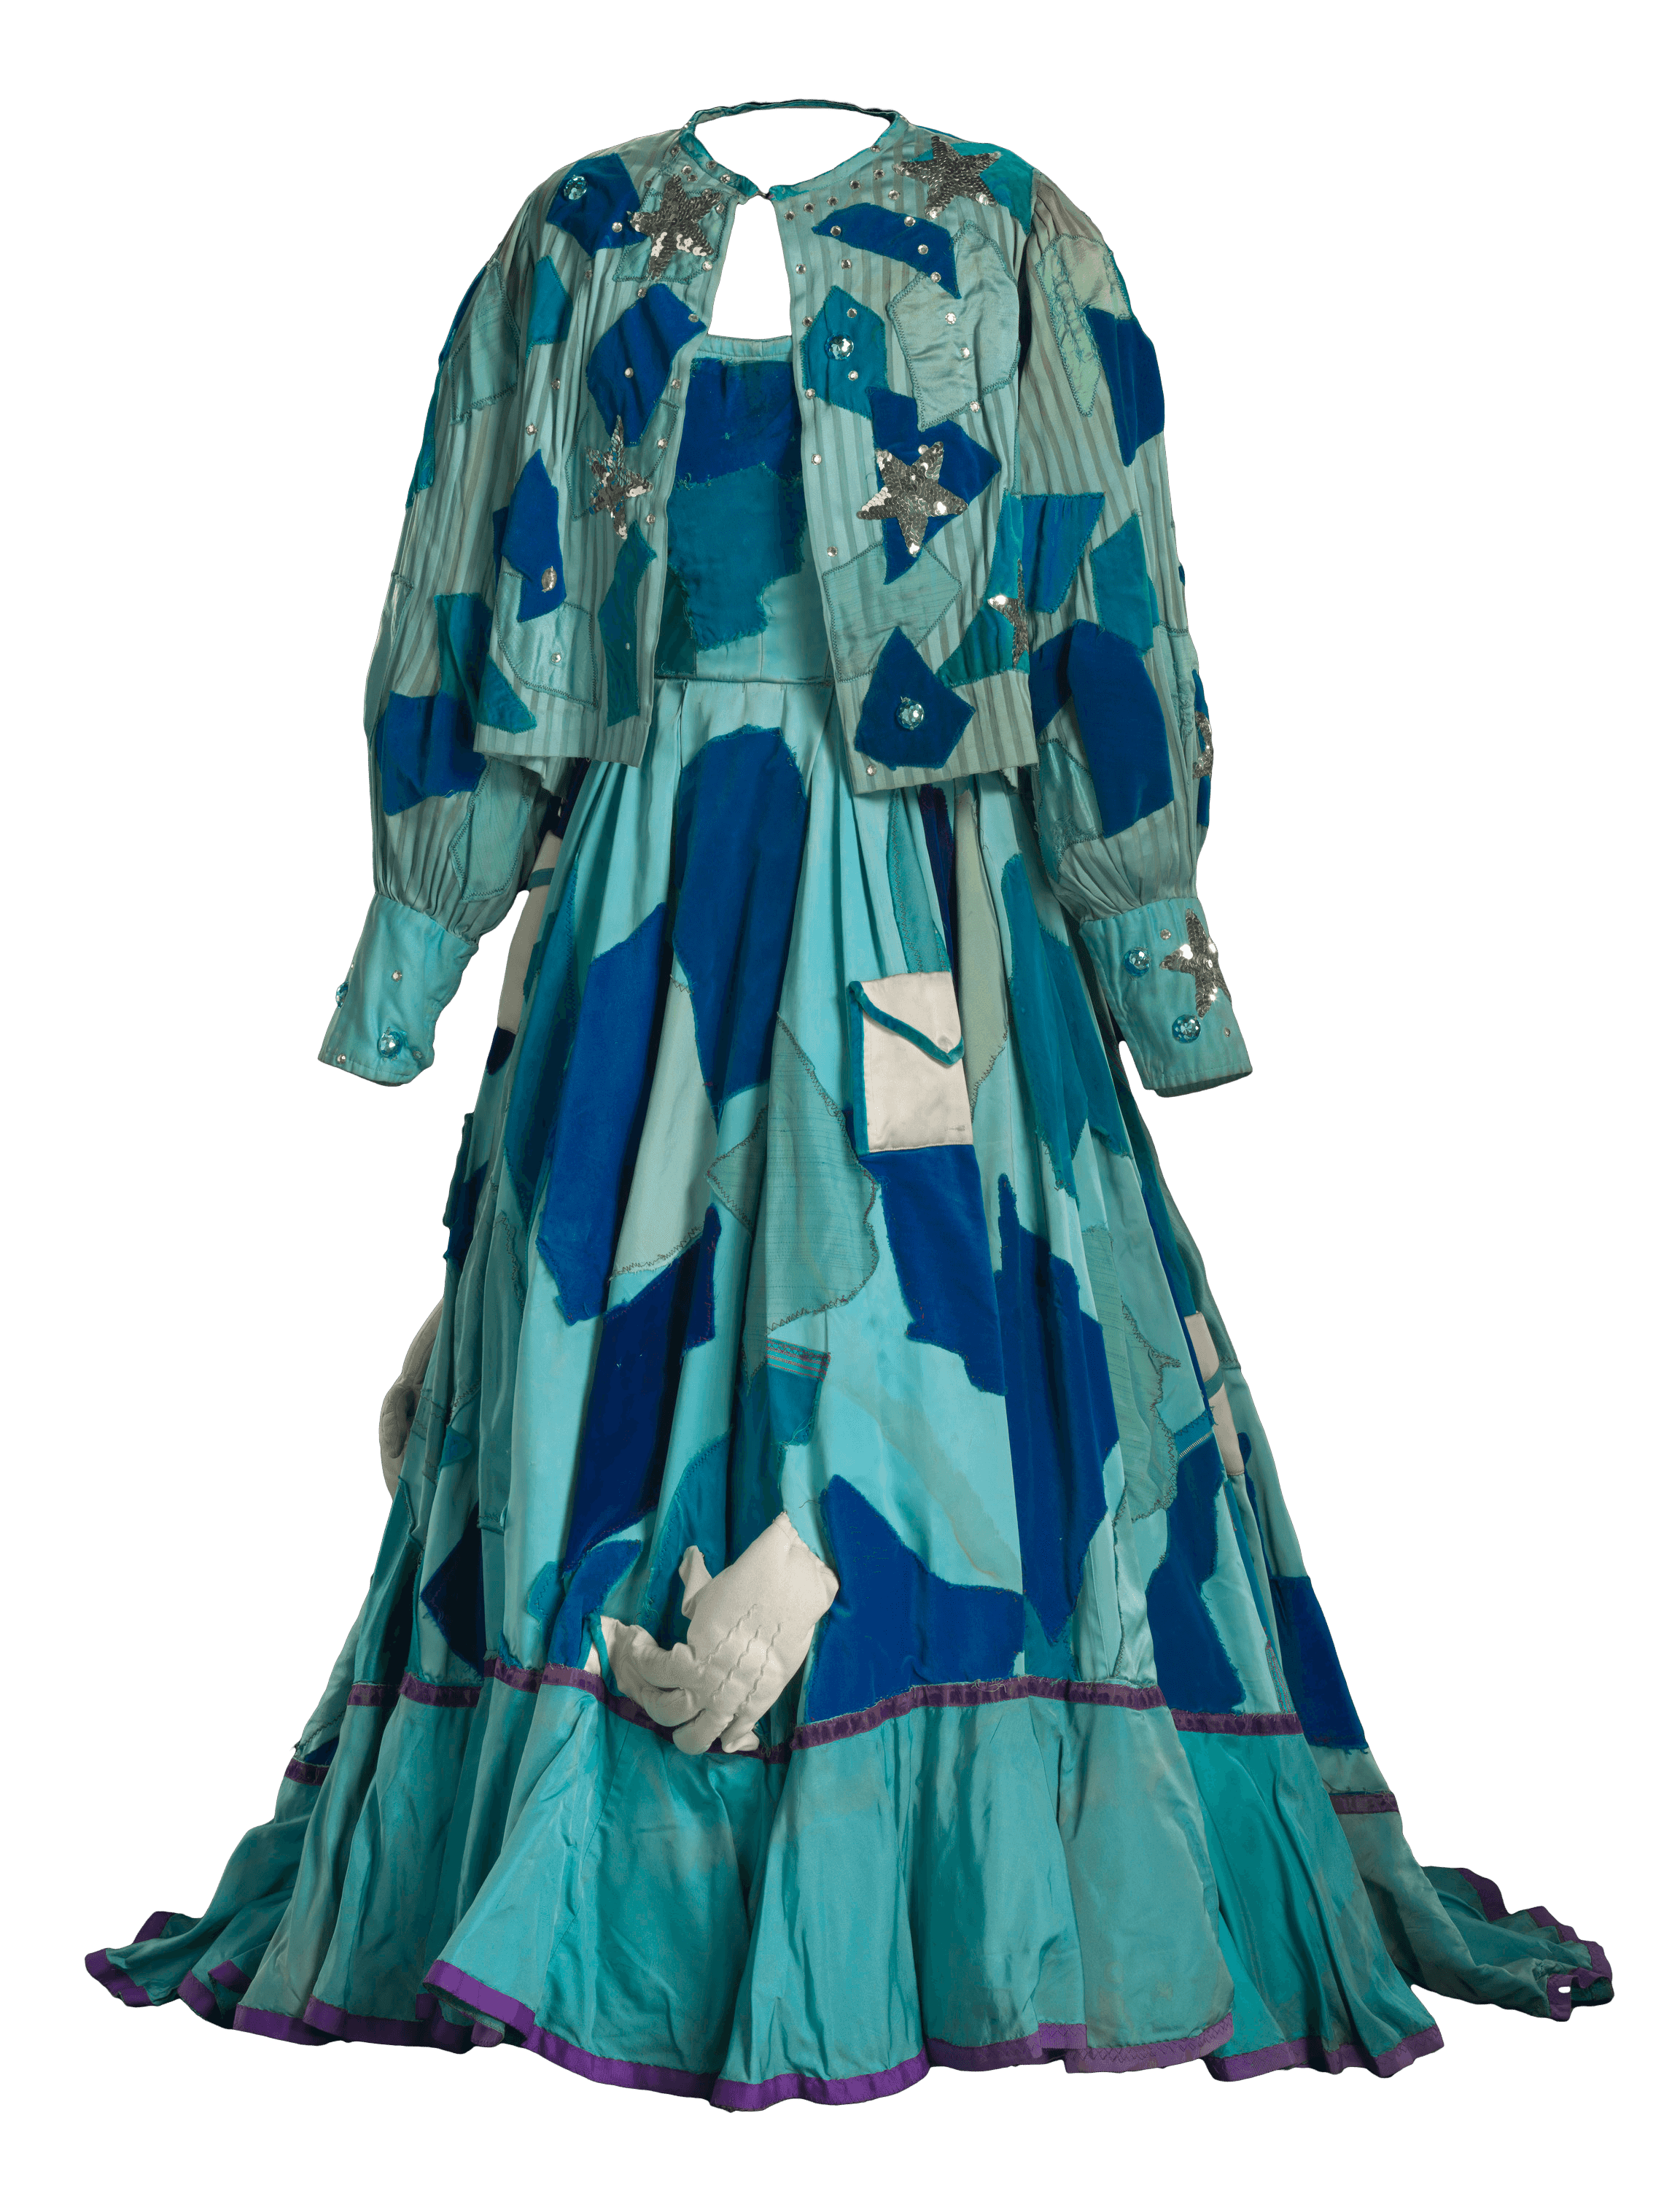 A blue and teal organic shaped, patchwork costume gown, petticoat, and jacket for Addaperle in The Wiz.